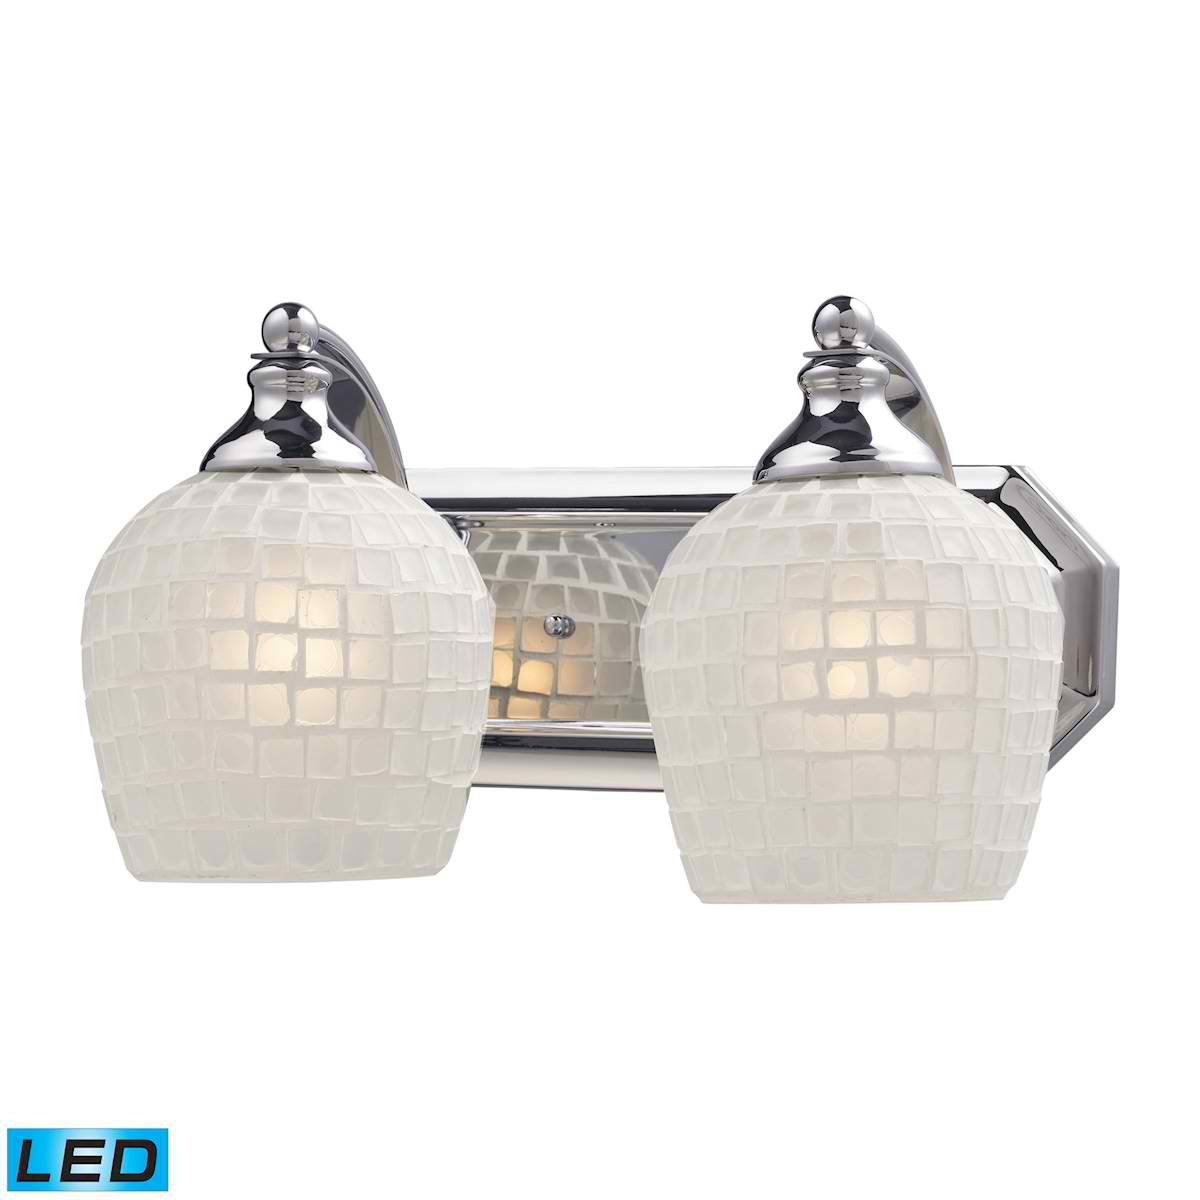 2 Light Vanity in Polished Chrome and White Mosaic Glass - LED, 800 Lumens (1600 Lumens Total) With Full Scale